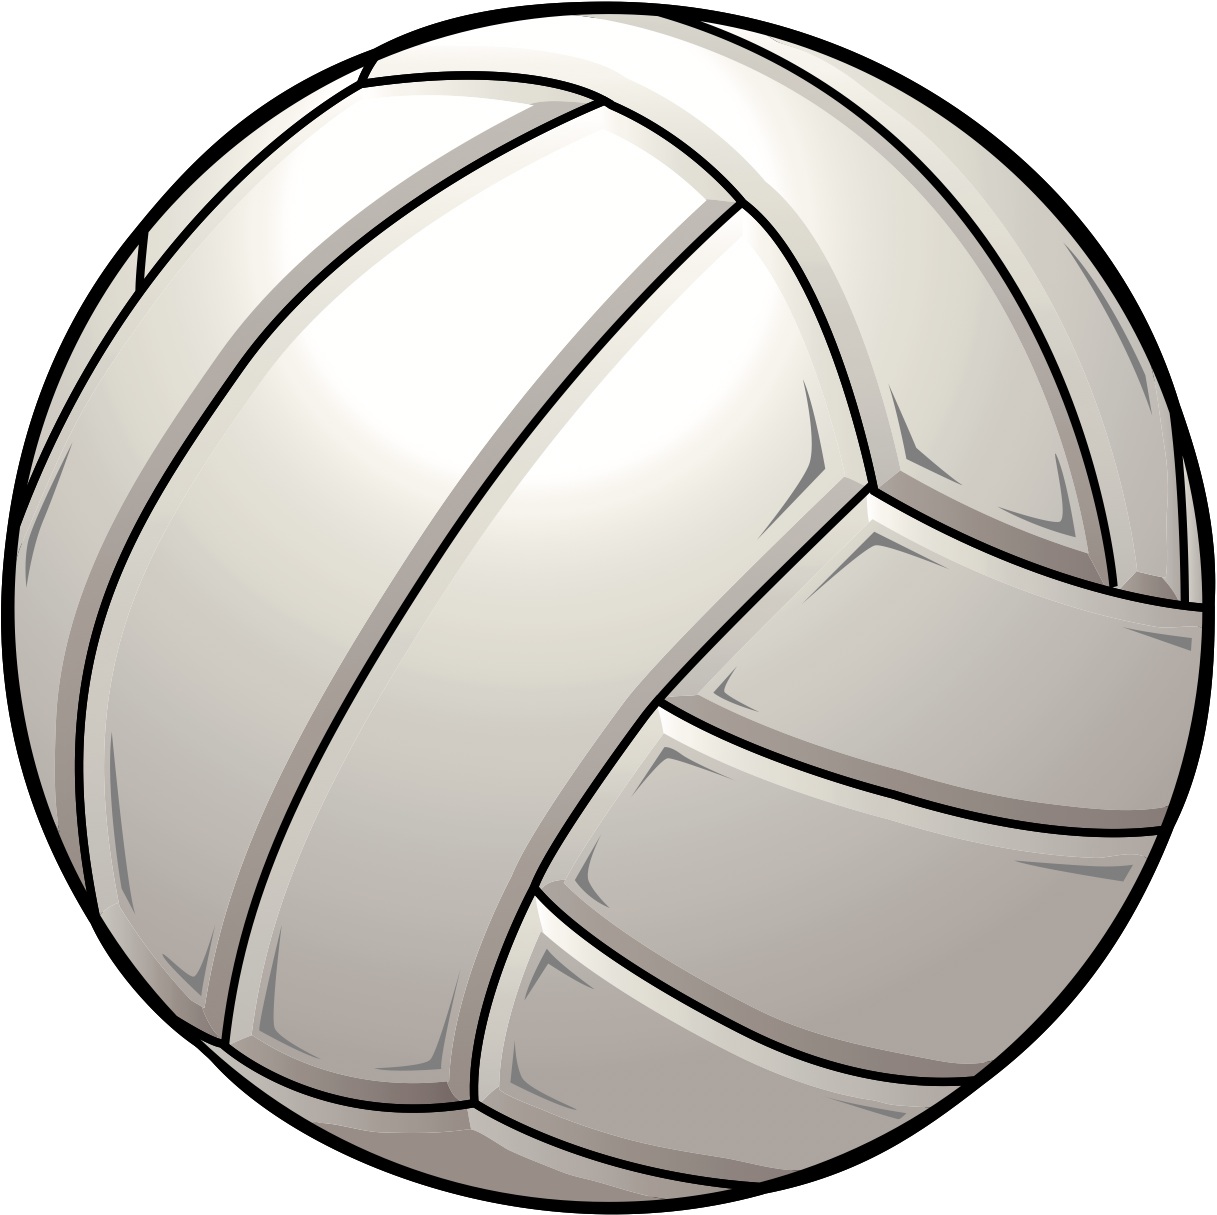 Free Printable Volleyball Cliparts, Download Free Printable Volleyball ...